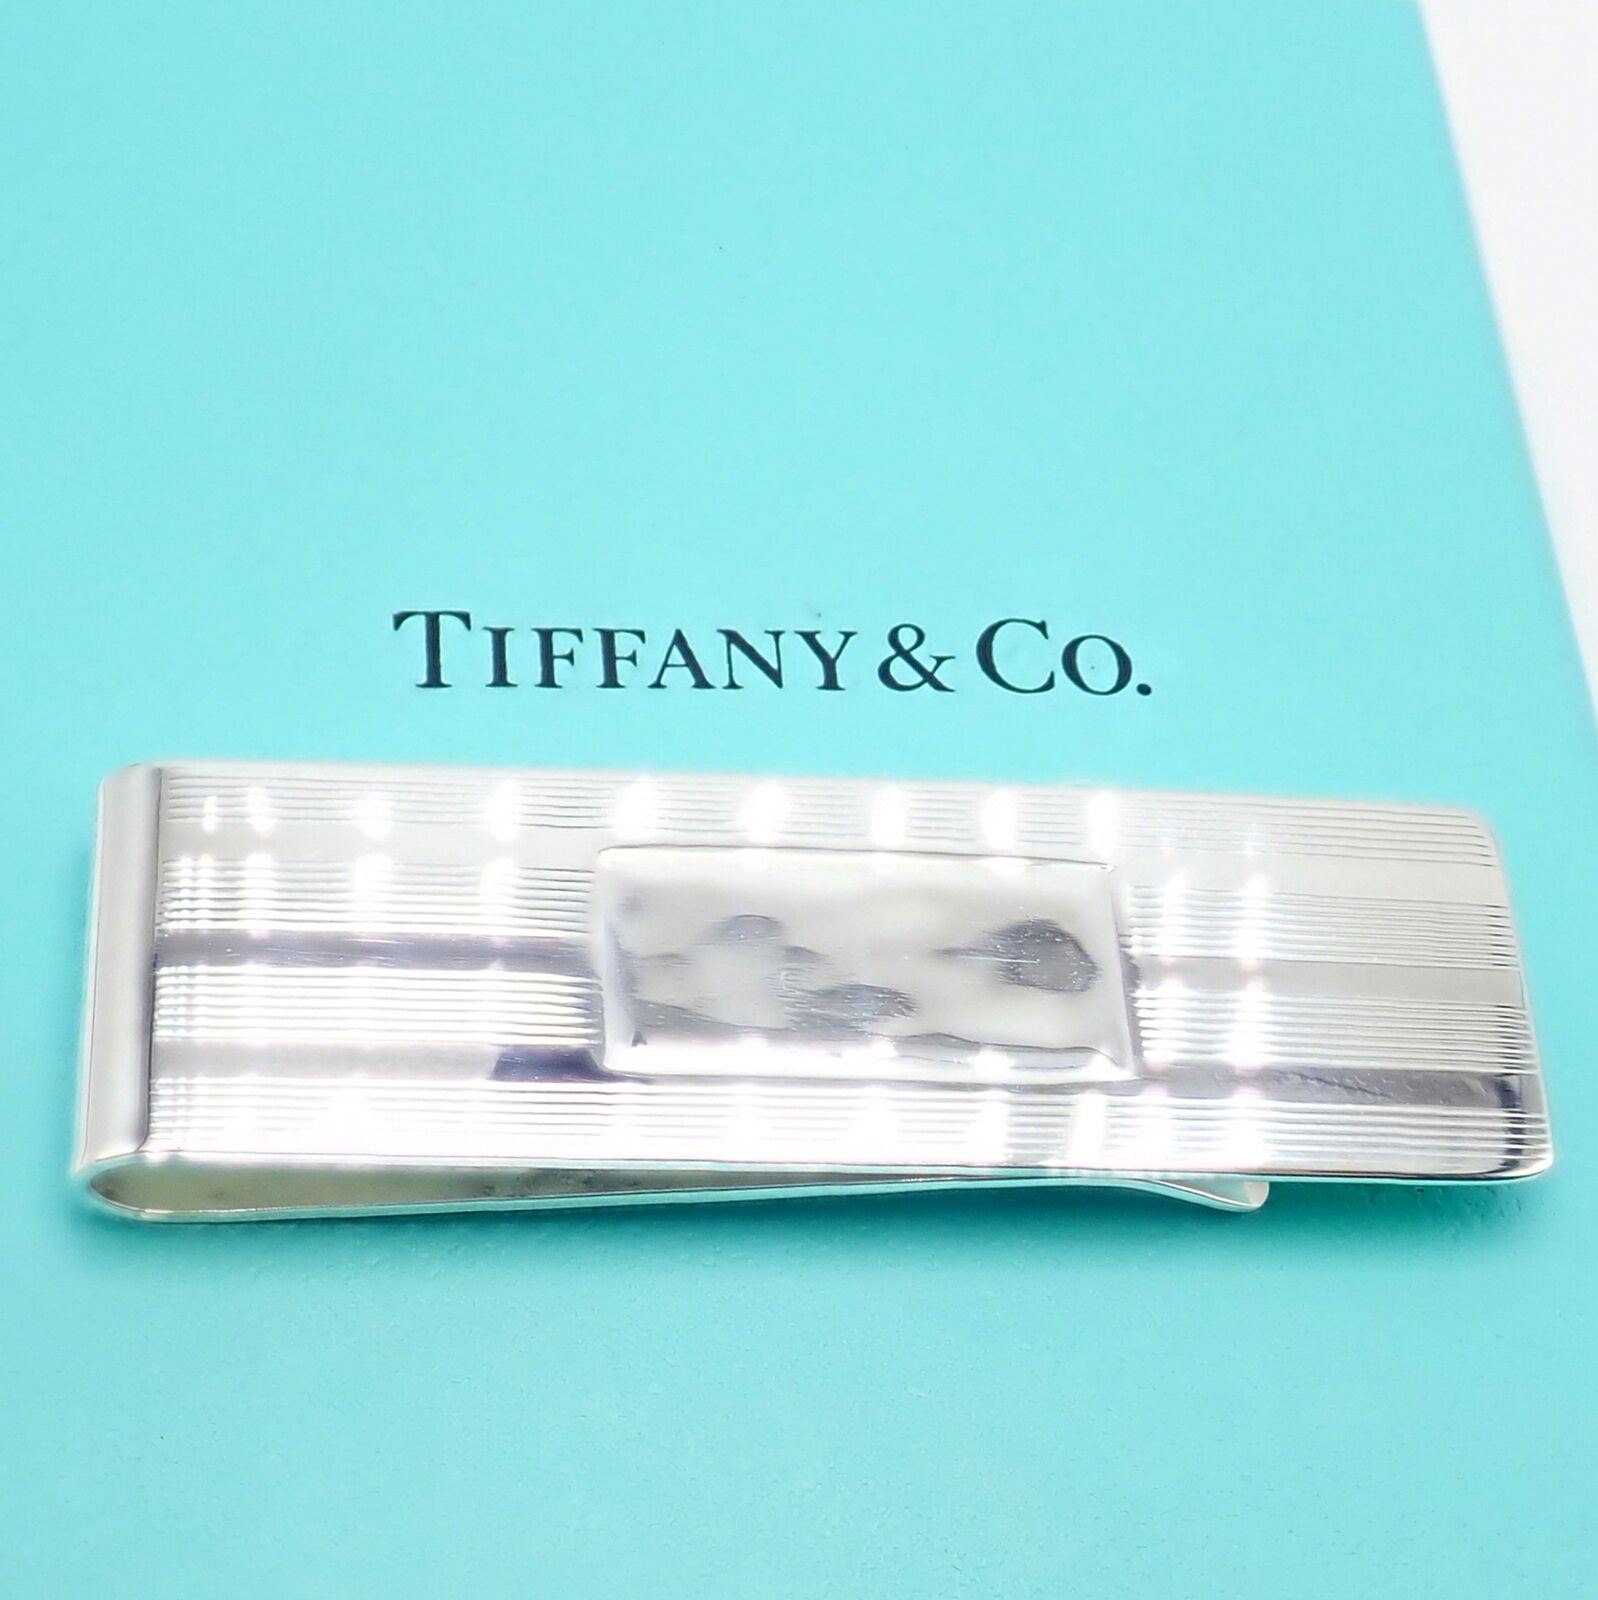 Tiffany & Co. Jewelry & Watches:Other Jewelry Vintage! Authentic Tiffany & Co Silver Money Clip - No Monogram